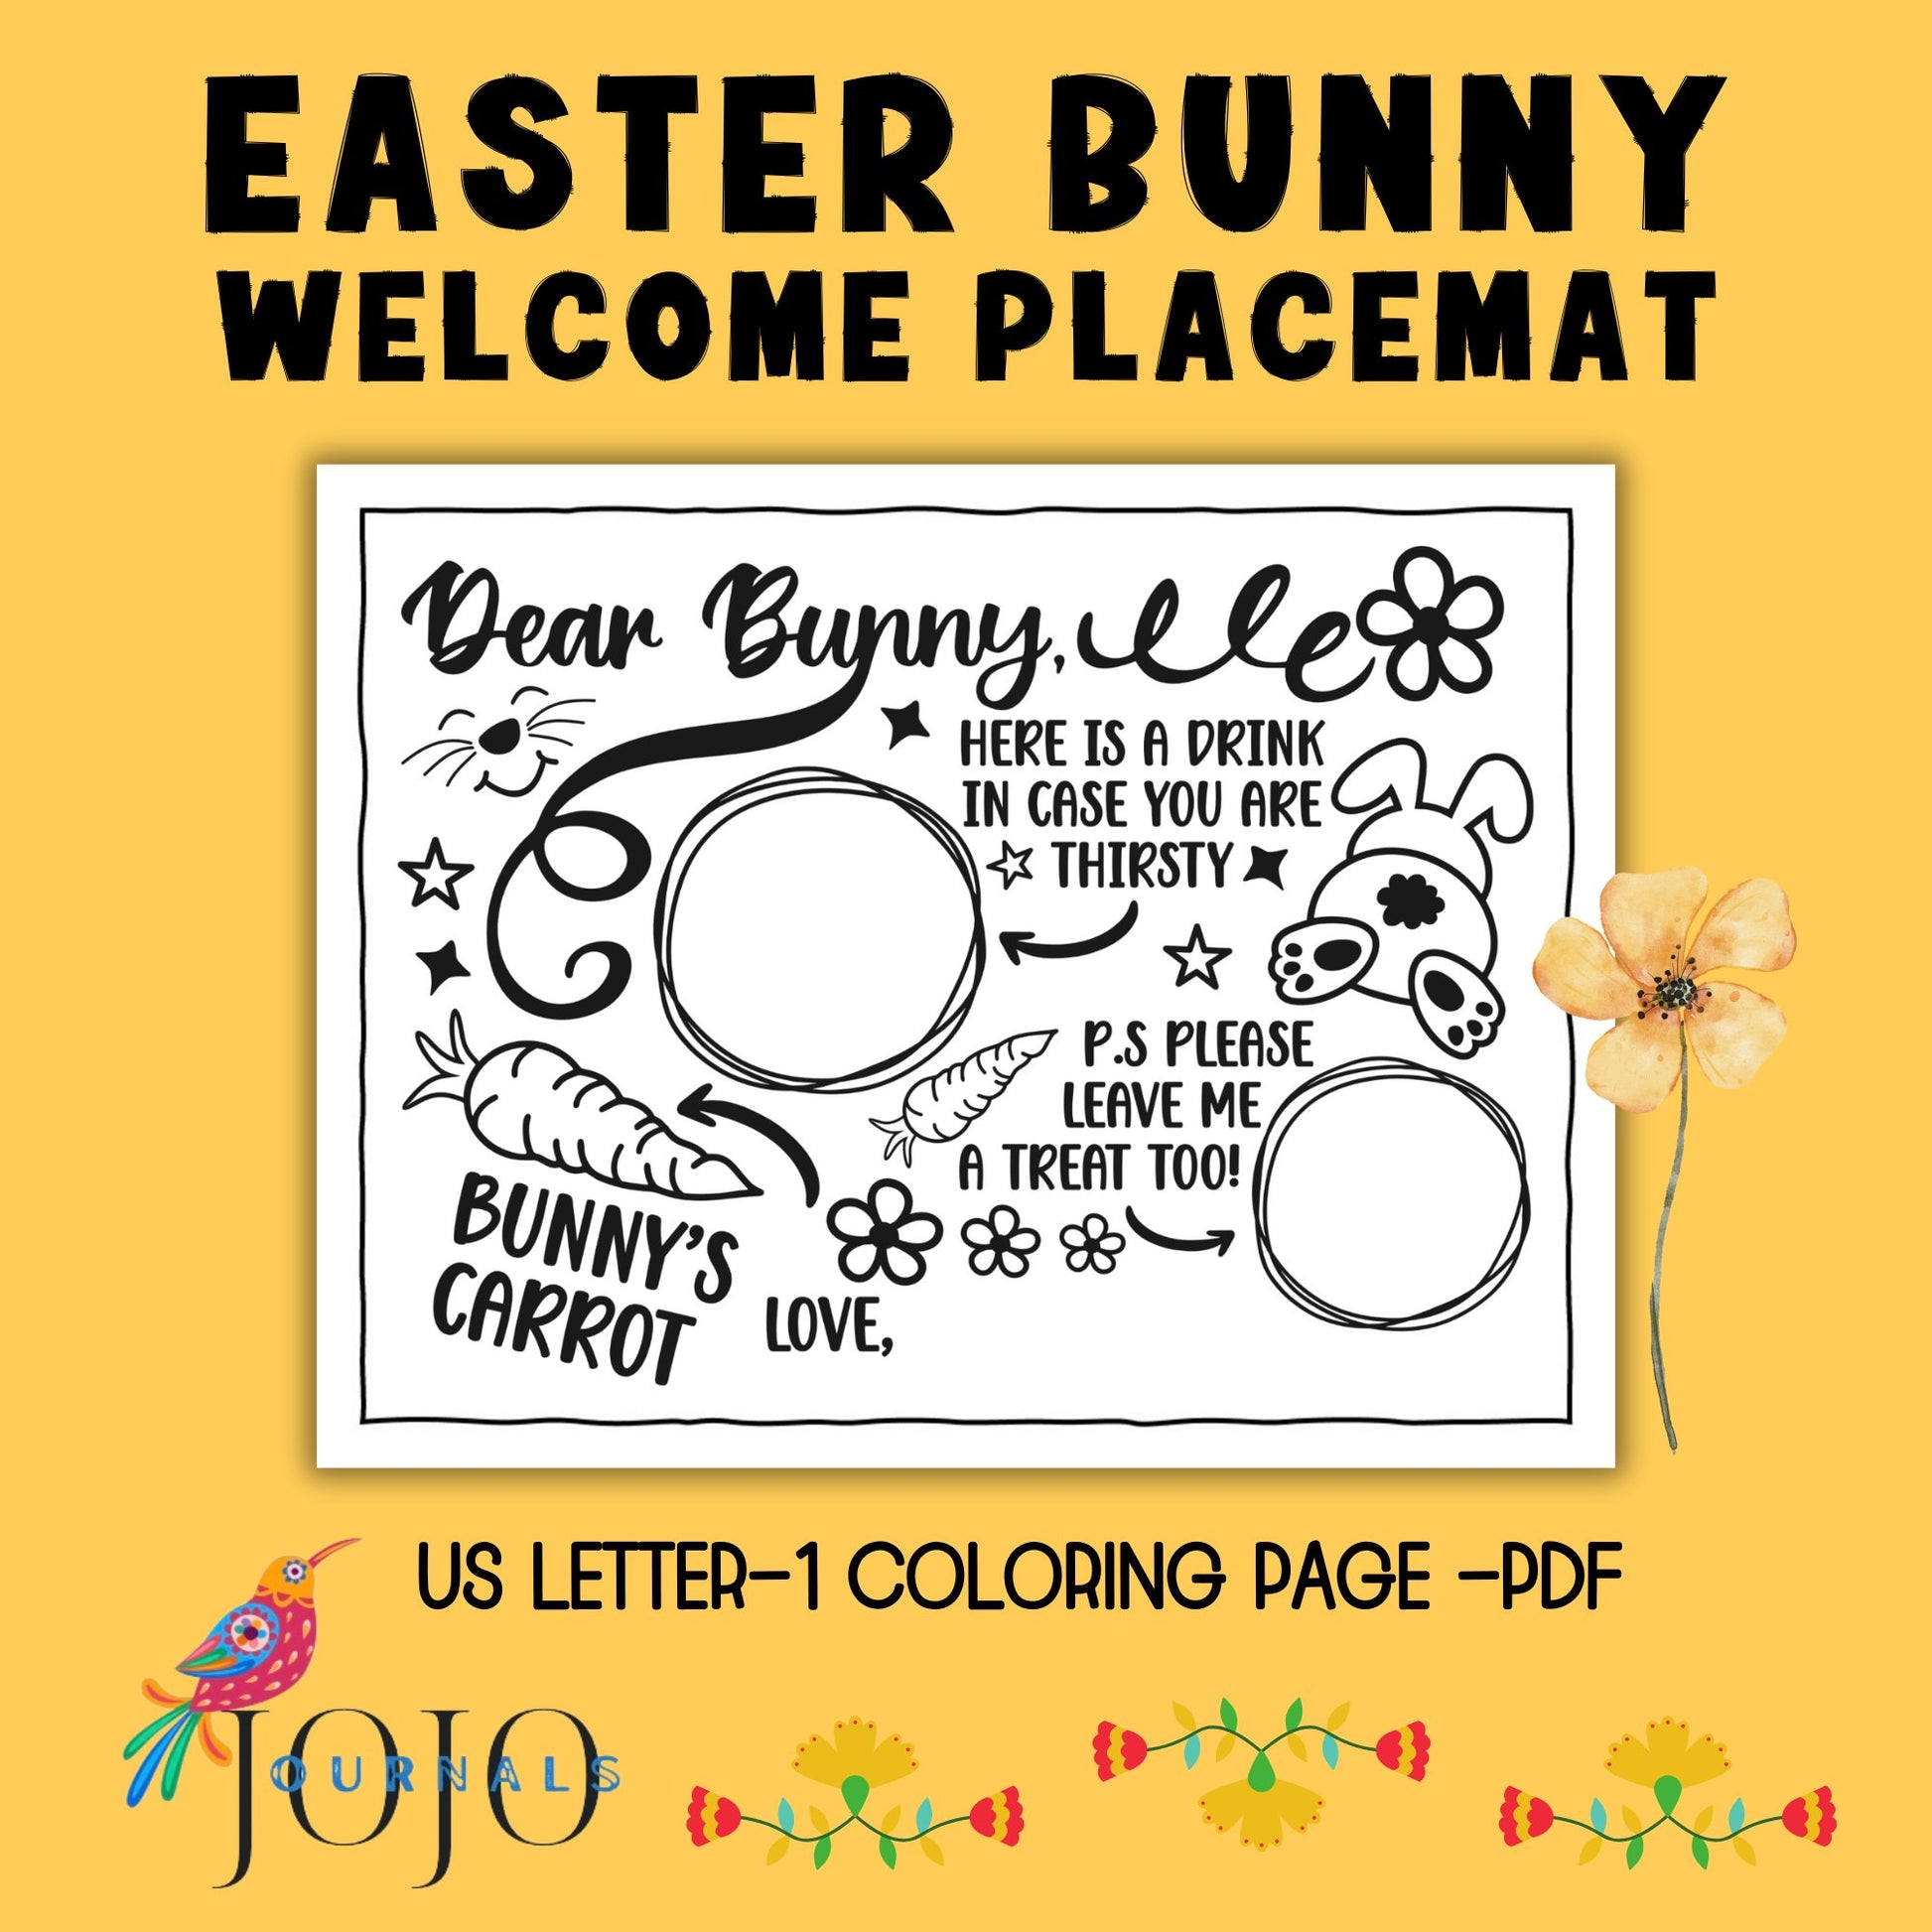 Dear Bunny- Coloring Page Placemats-Printable US Letter, Instant Download PDF - Fiesta By JoJo Journals